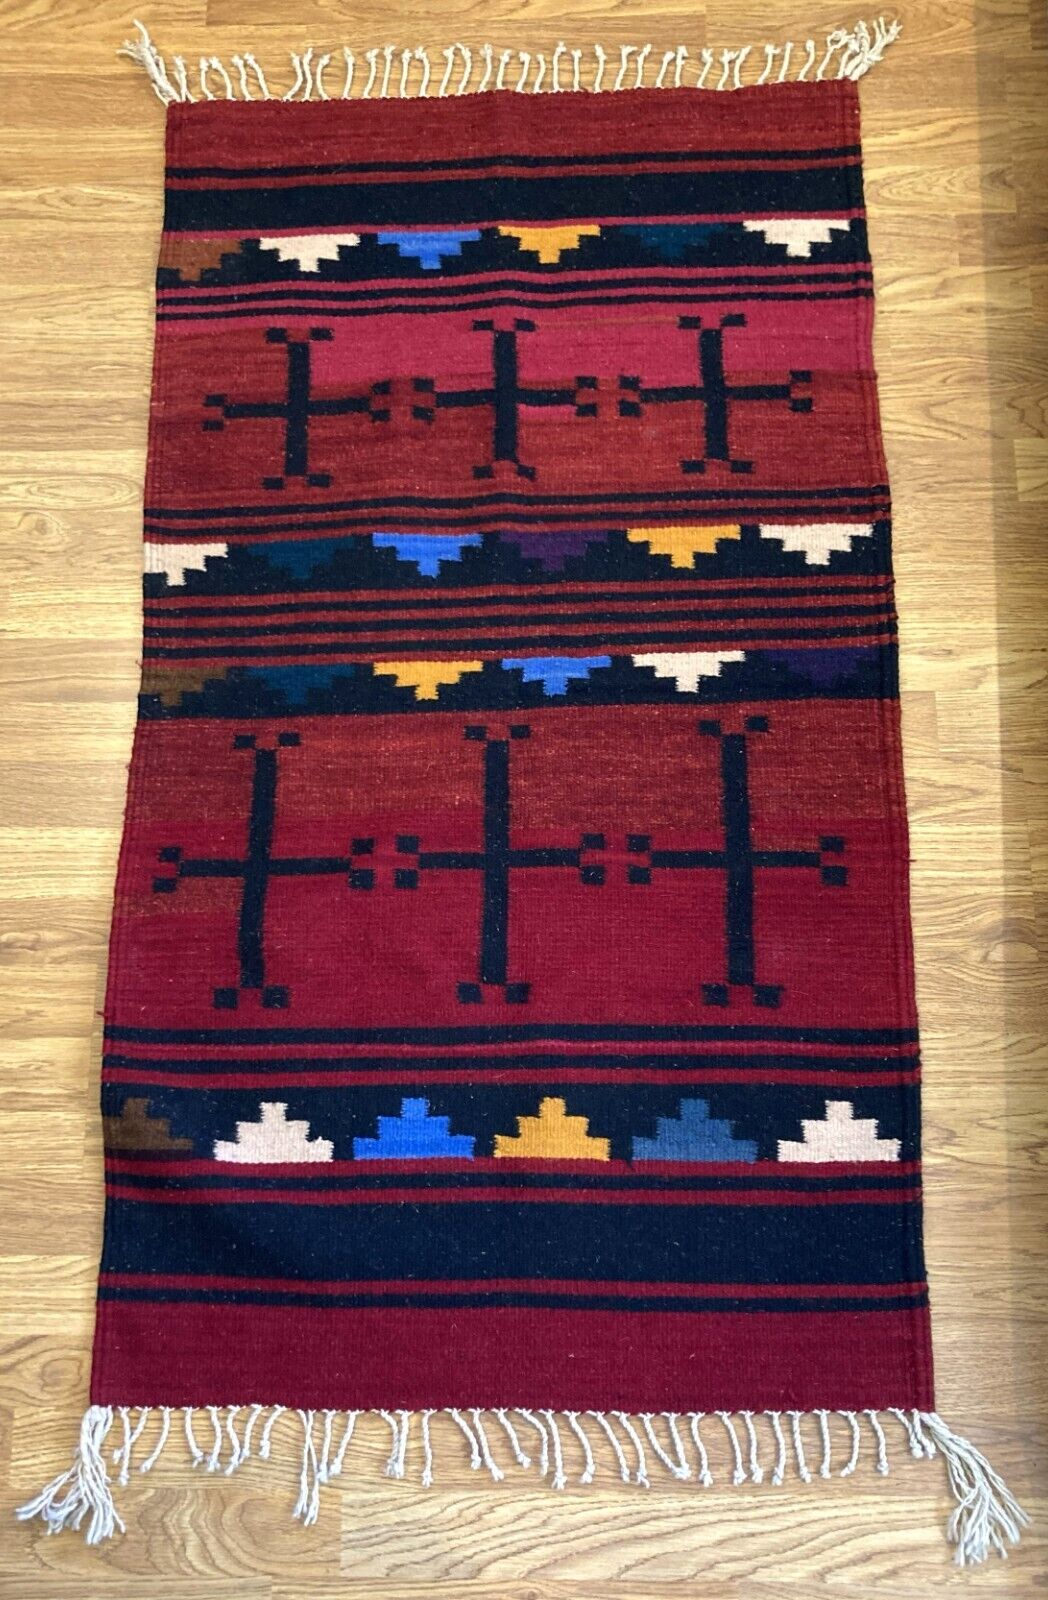 Vintage Mexican Zapotec Area Rug 52 X 29 Hand Woven Fringed Southwest Design Red